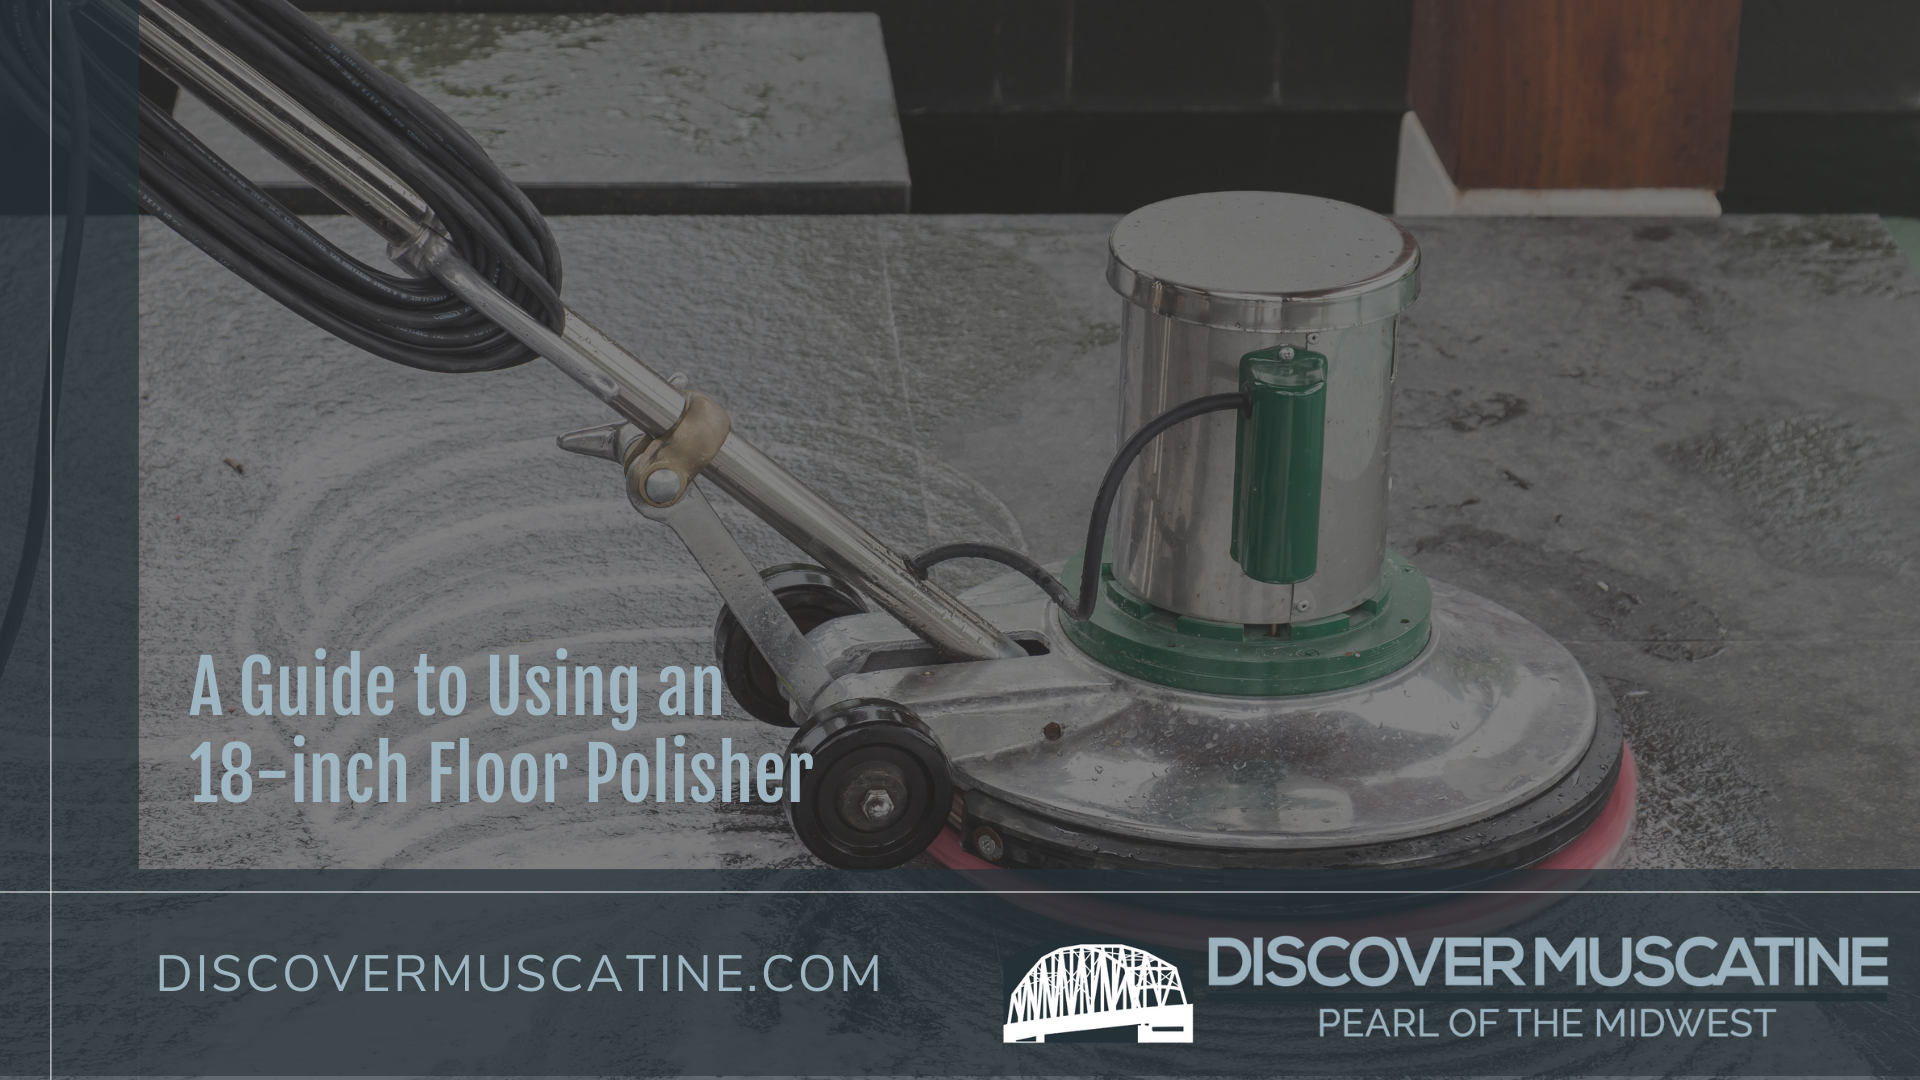 A guide to using a 18-inch floor polisher